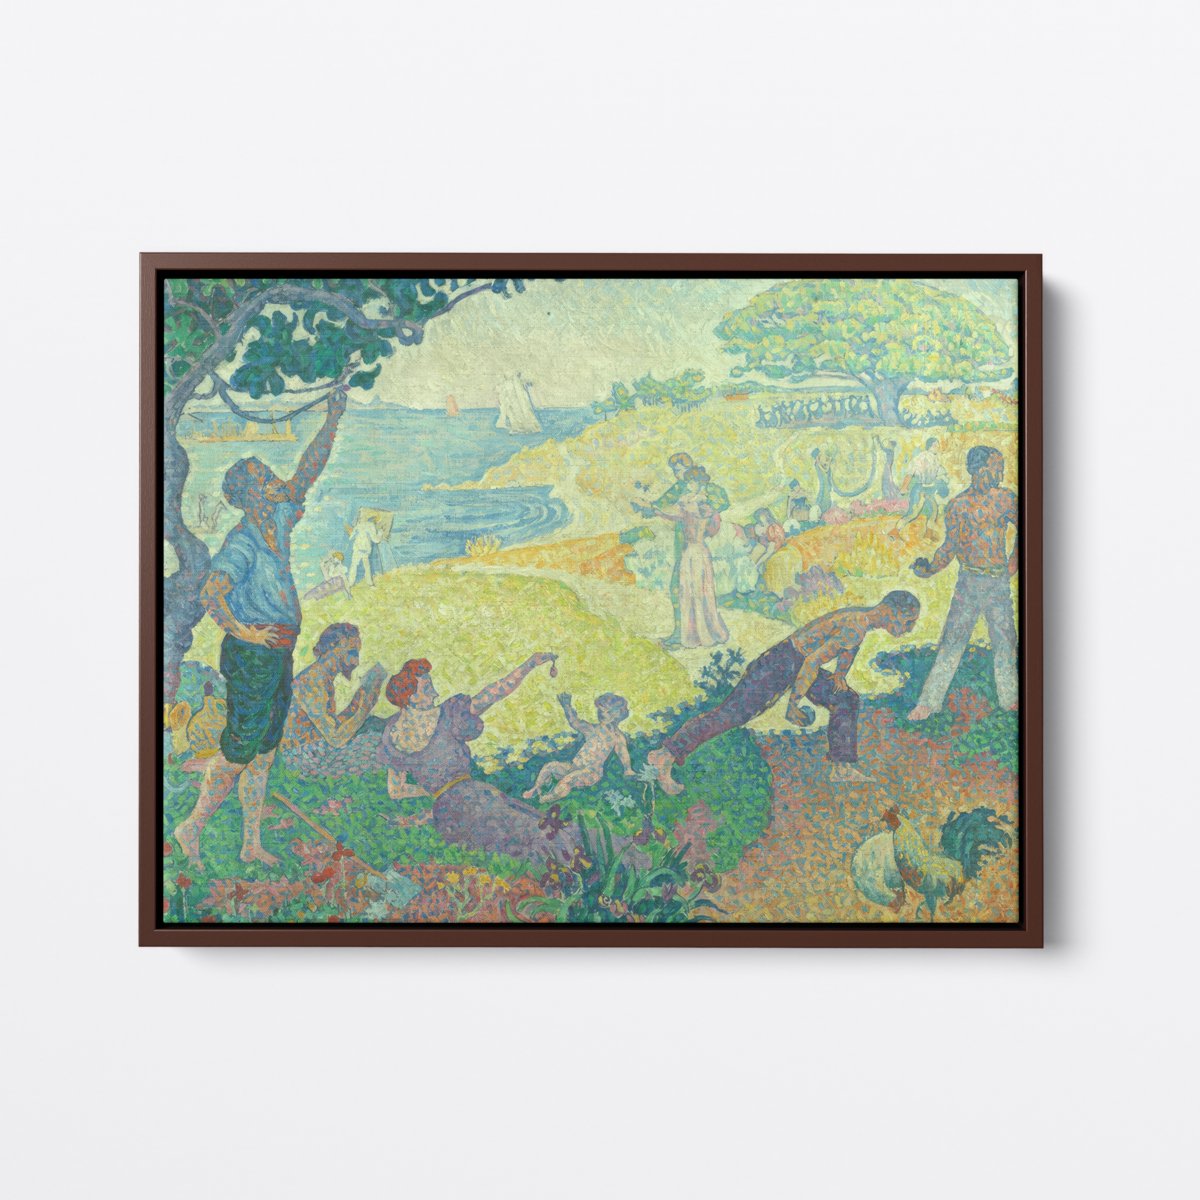 In the Time of Harmony | Paul Signac | Ave Legato | Canvas Art Prints | Vintage Artwork